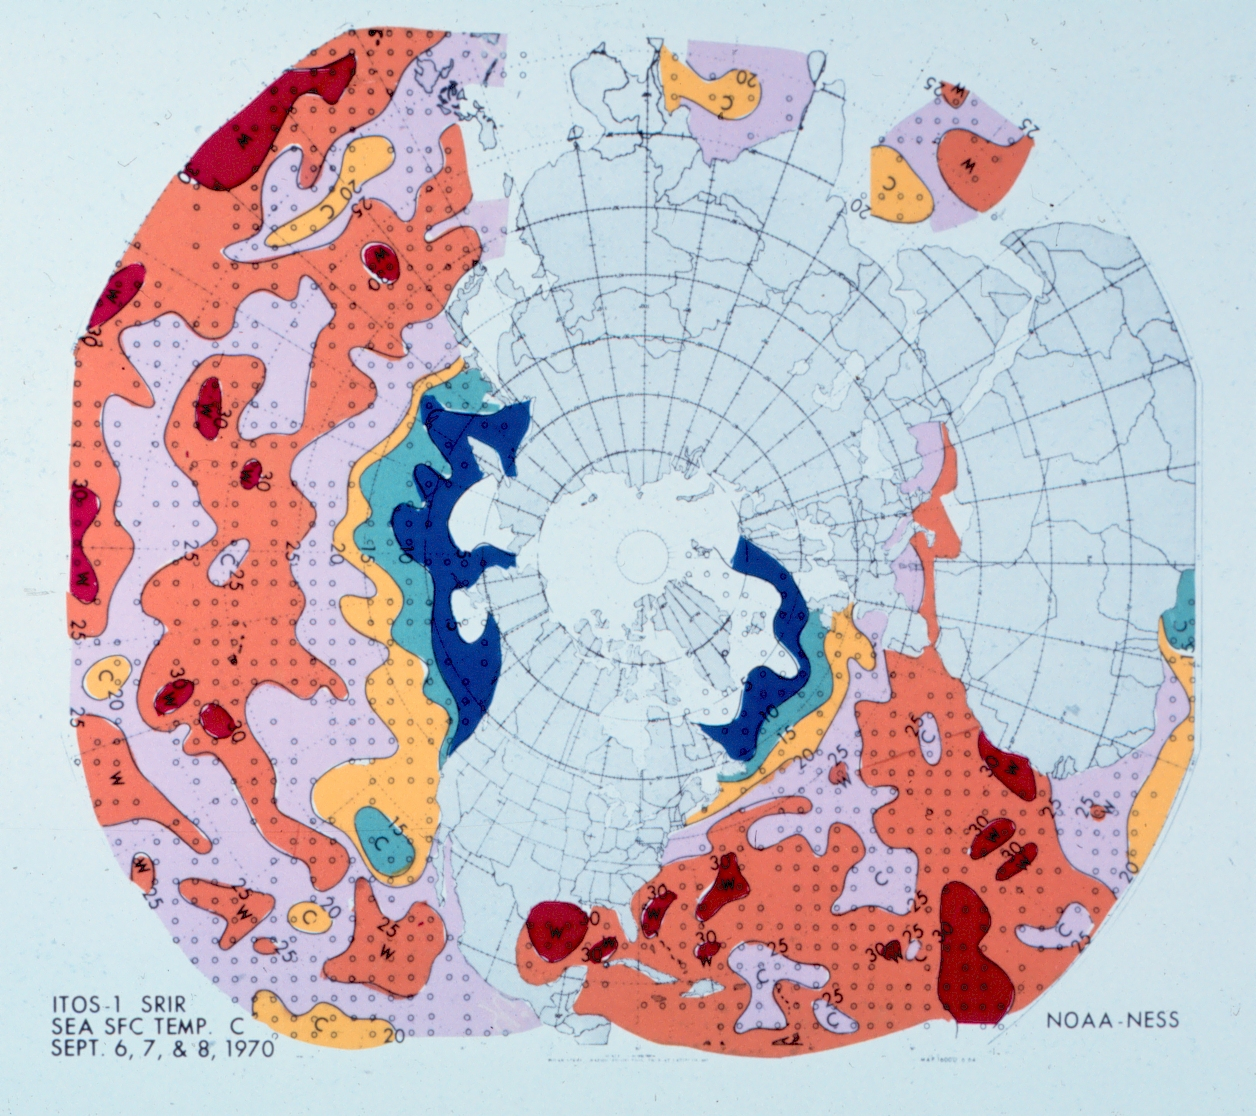 Contoured sea surface temperature map of the Northern Hemisphere